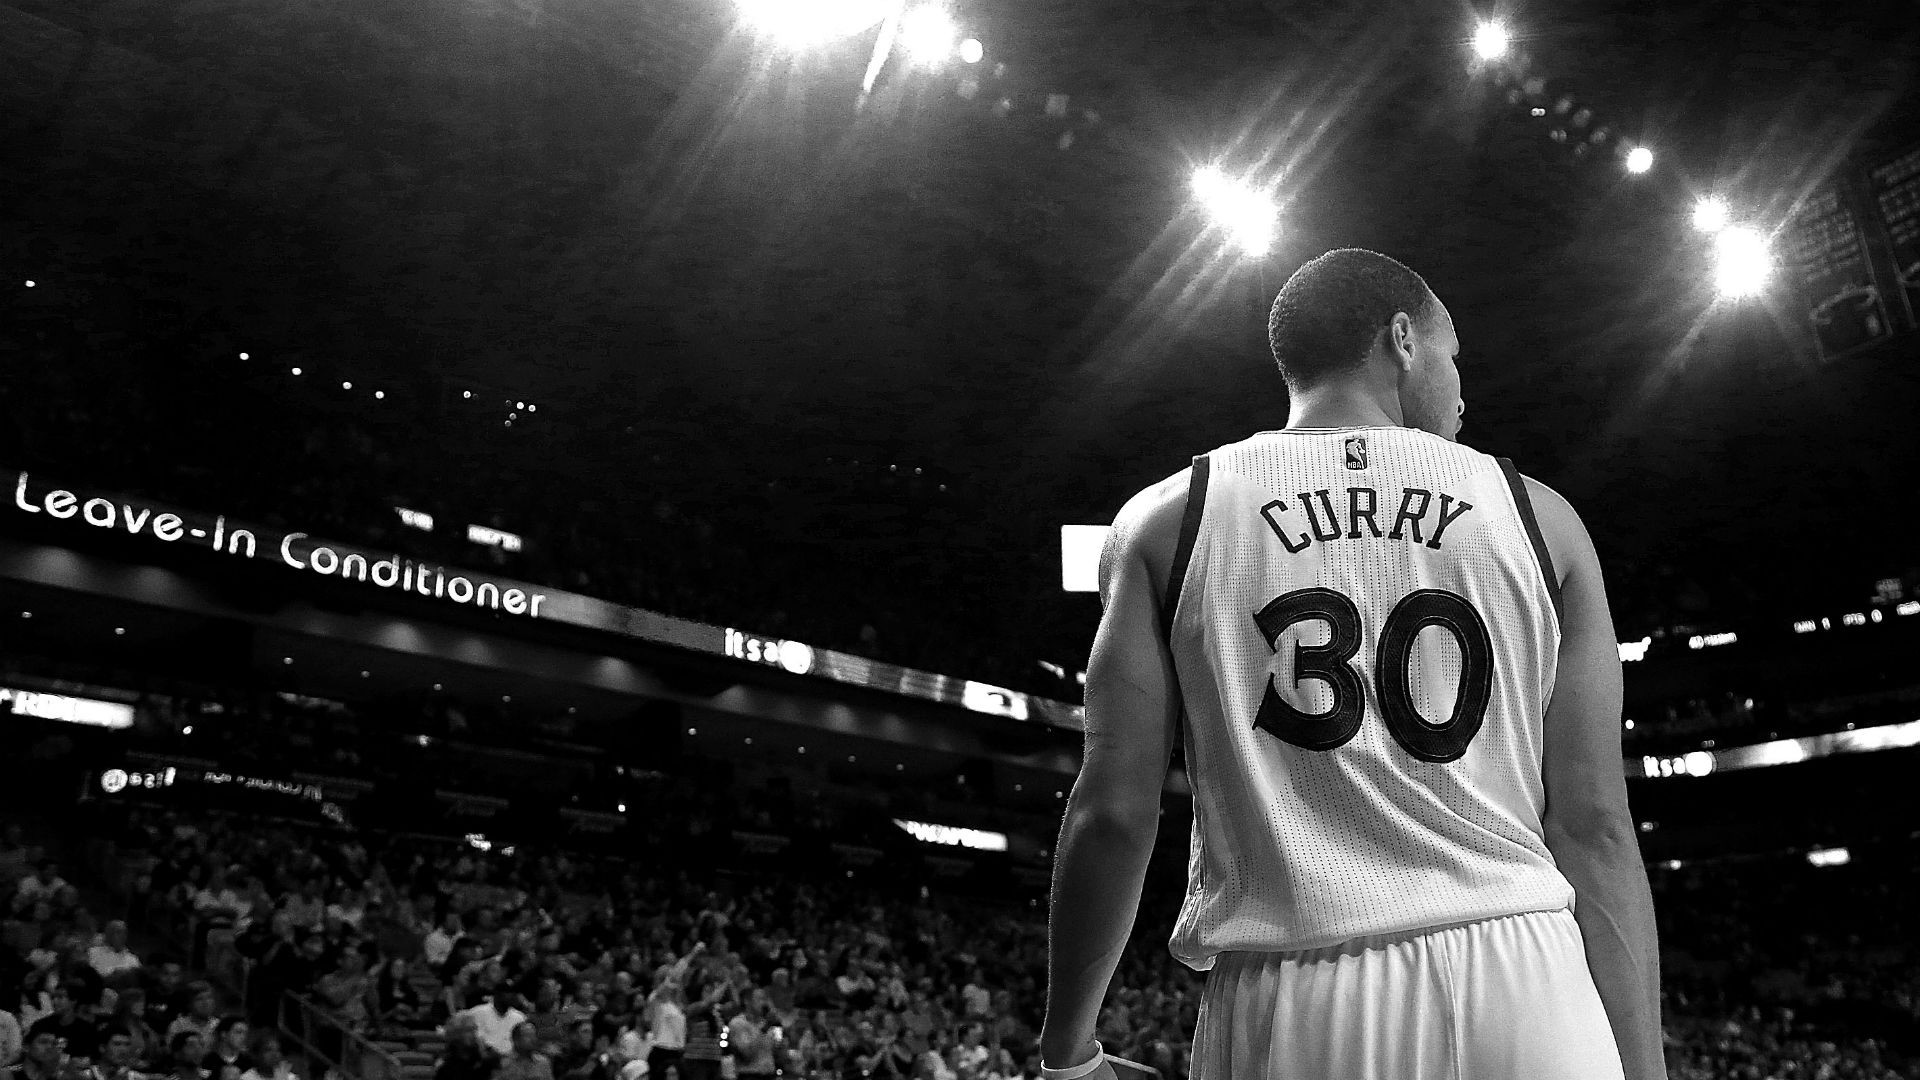 1920x1080 Title : 23 stephen curry hd wallpapers | background images – wallpaper  abyss. Dimension : 1920 x 1080. File Type : JPG/JPEG